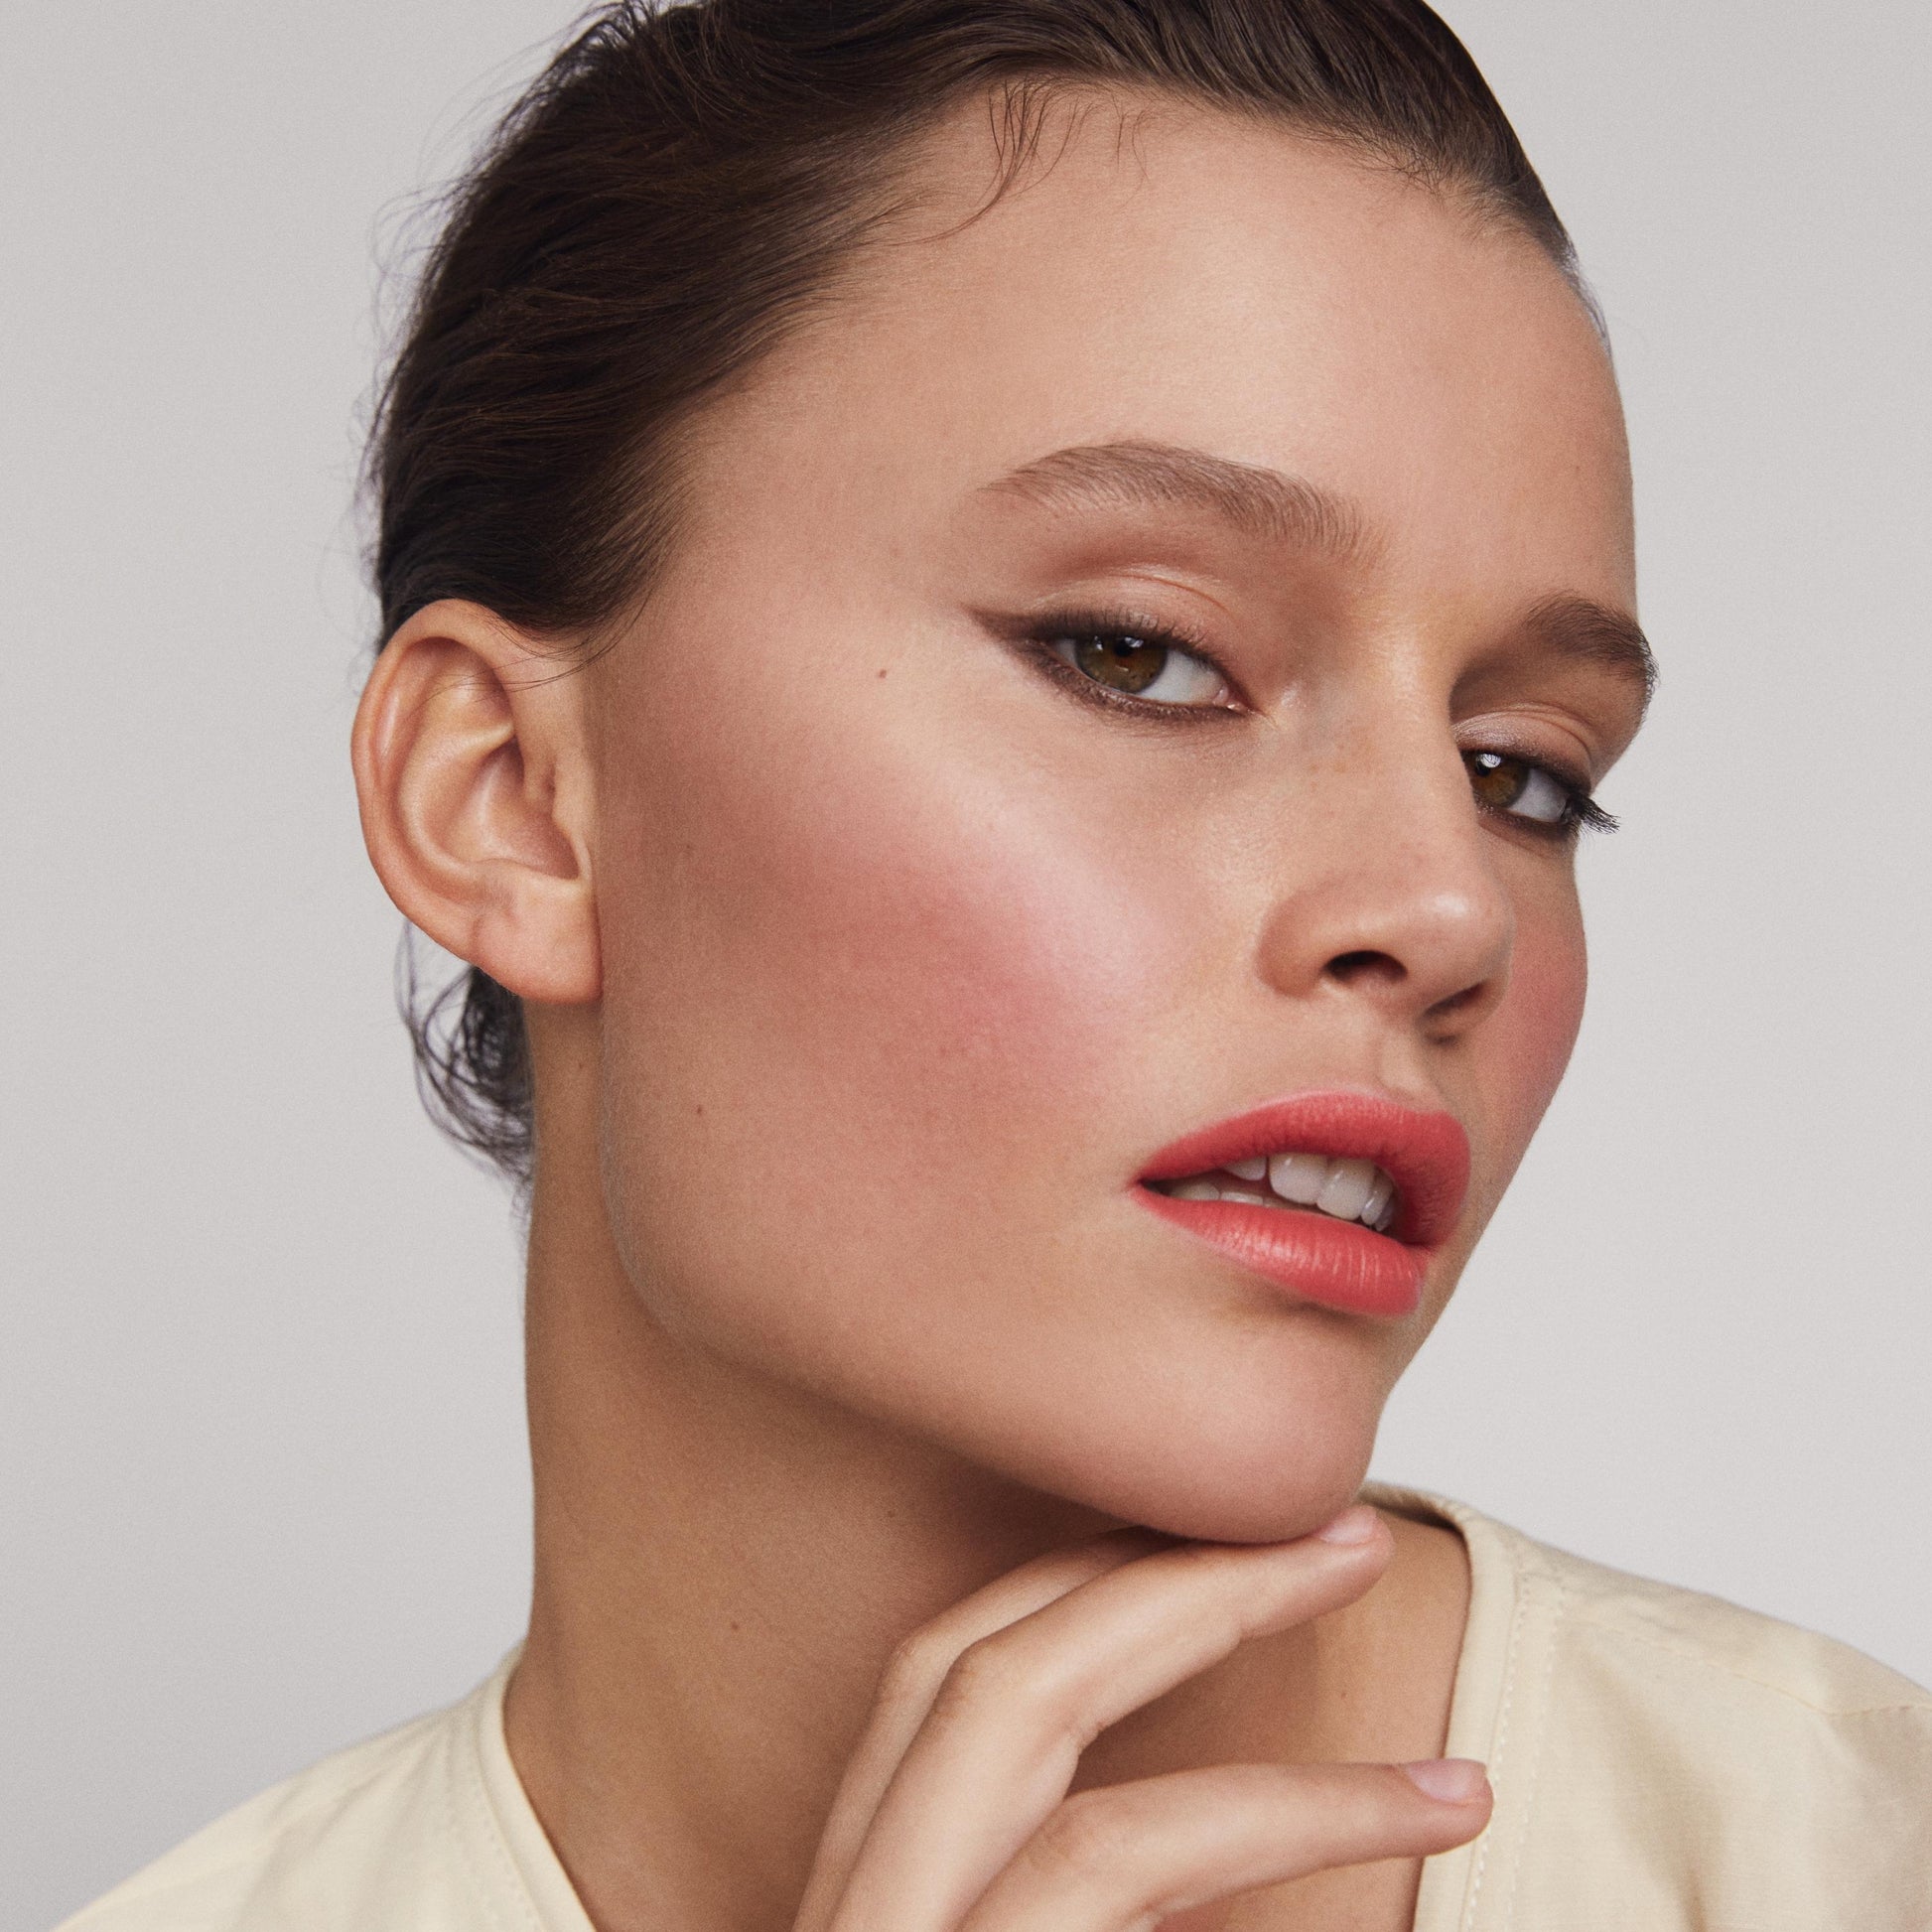 The CHANEL LES BEIGES Foundation — Tried And Tested By 4 Models On